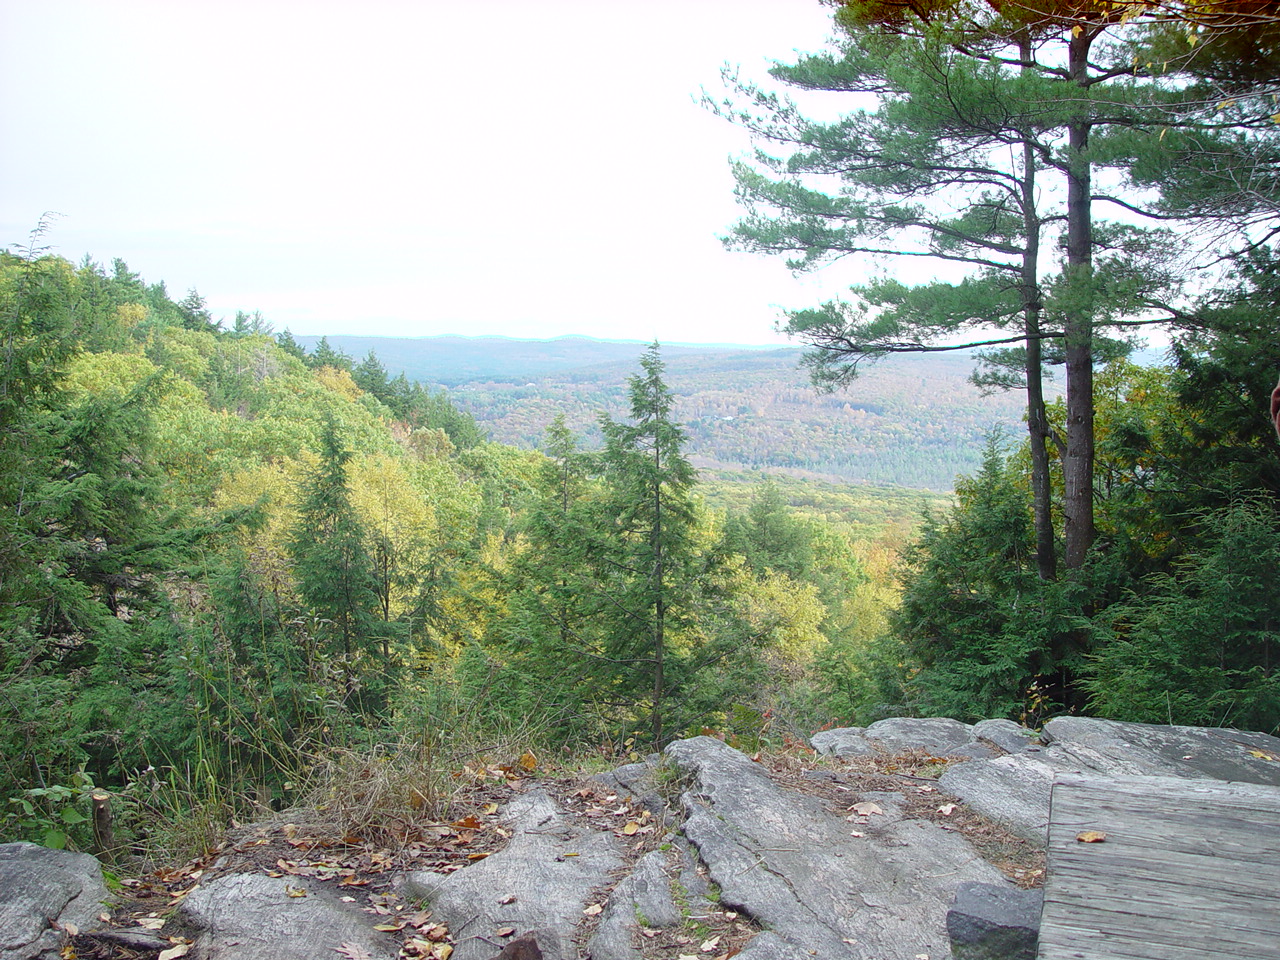 Young hikers (twenties, thirties, and young at heart) are invited to the Appalachain Trail Hike in Great Barrington MA on National Trails Day 2019